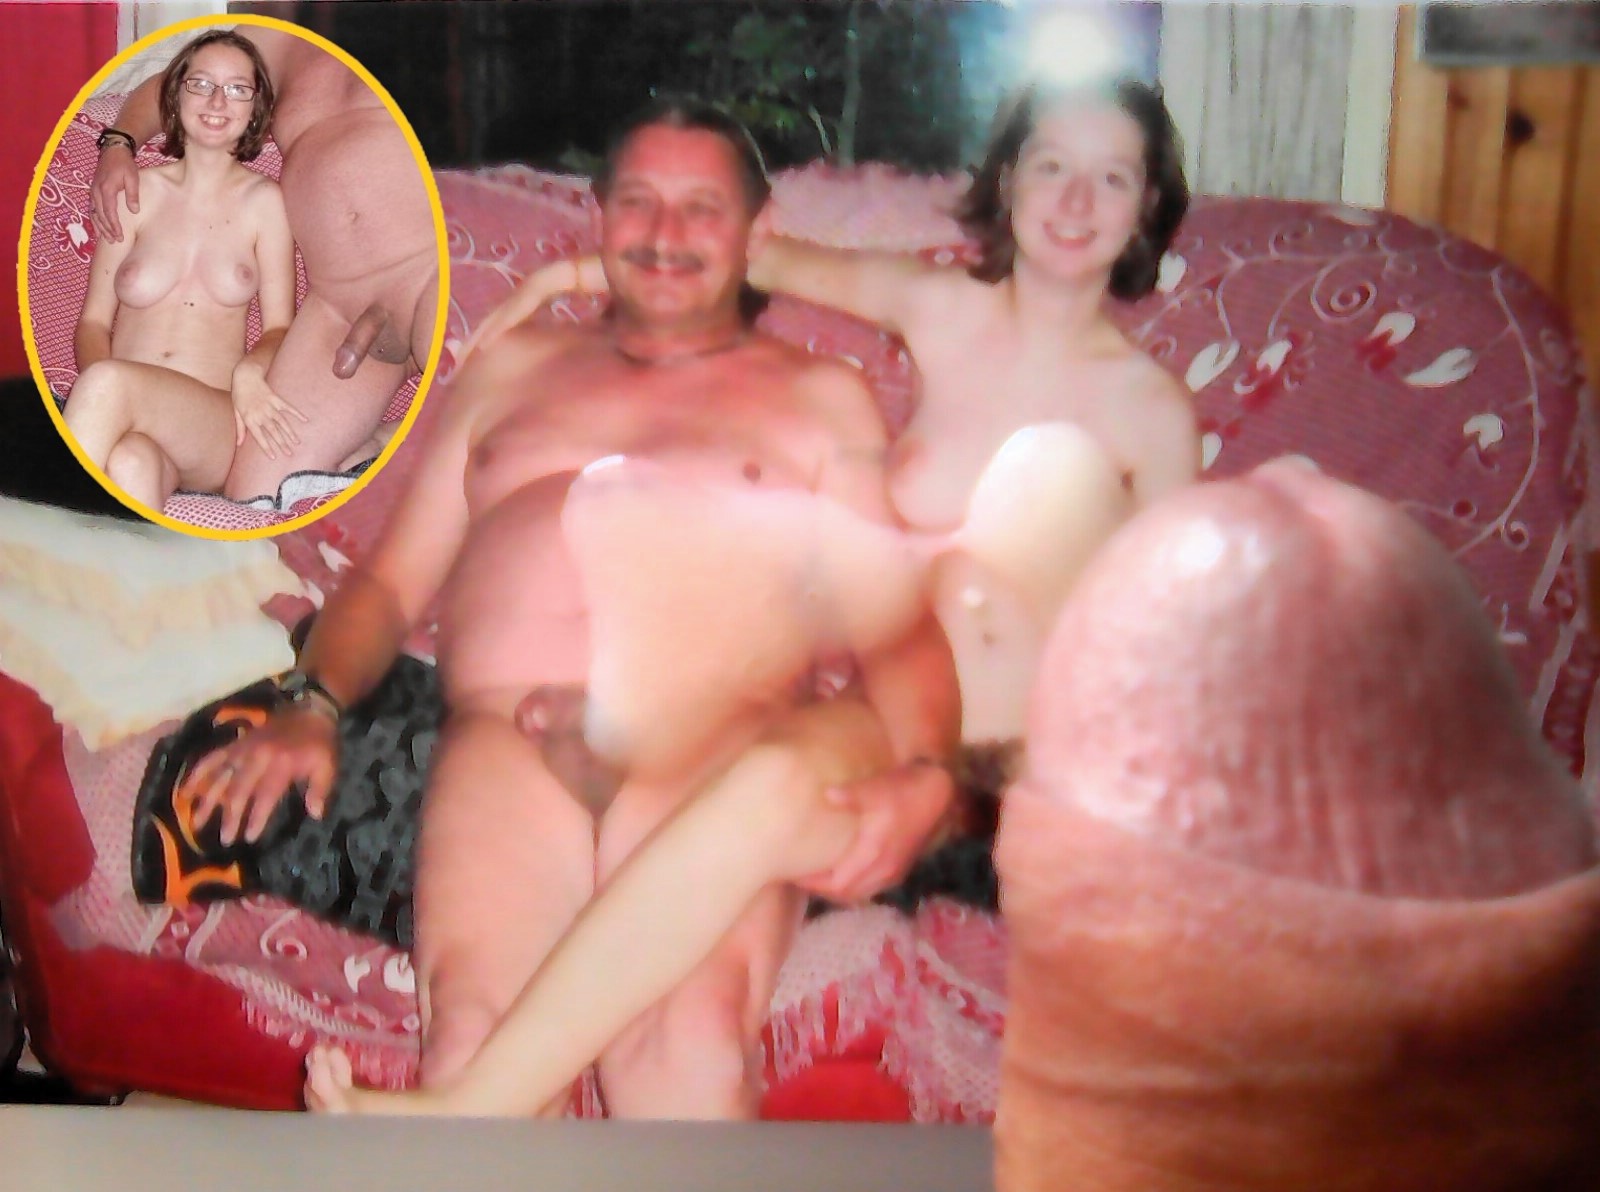 nudist family part 2 hairy busty nerdy pics & tribute